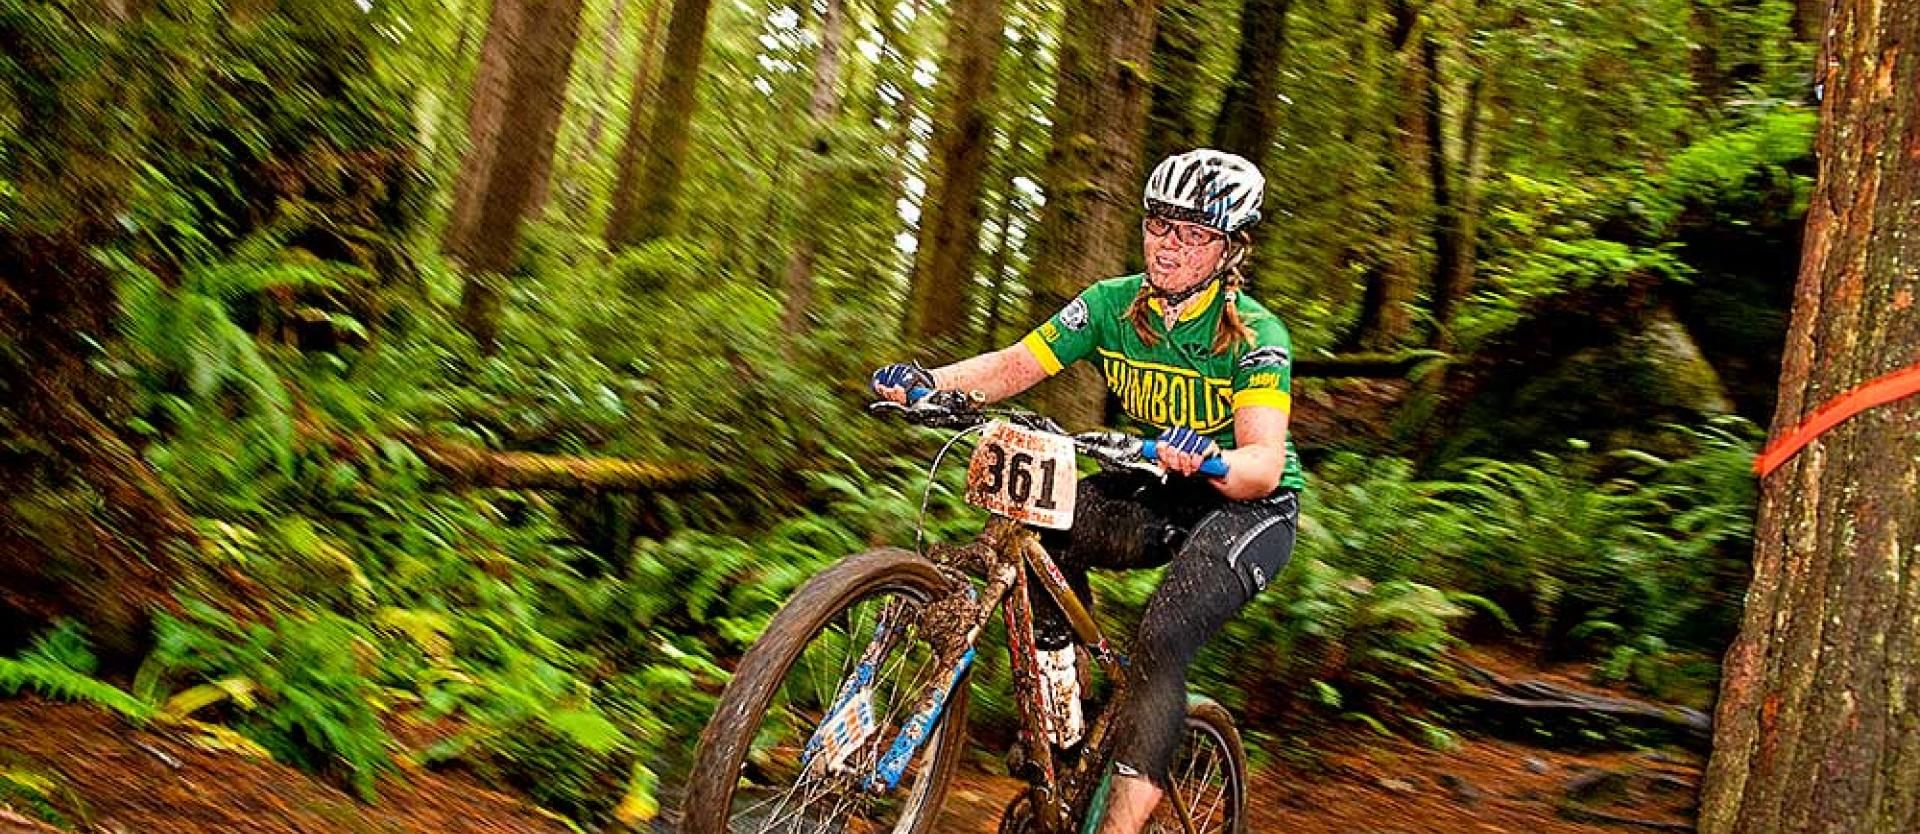 Member of the Humboldt Cycling Club racing to victory during local race in Arcata Community Forest